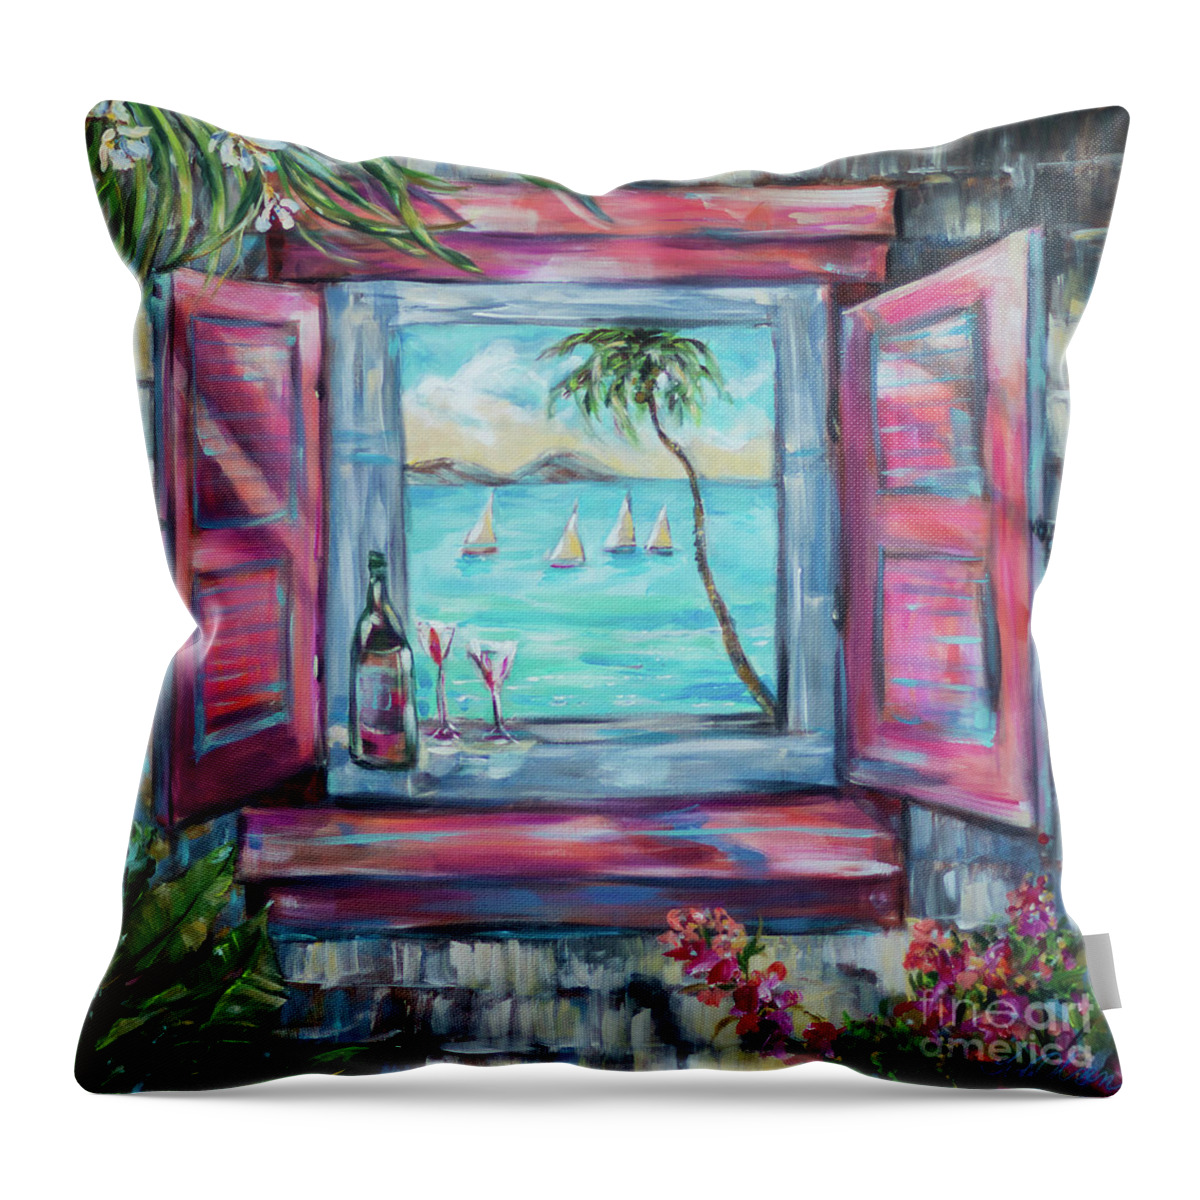 Island Throw Pillow featuring the painting Island Bar by Linda Olsen